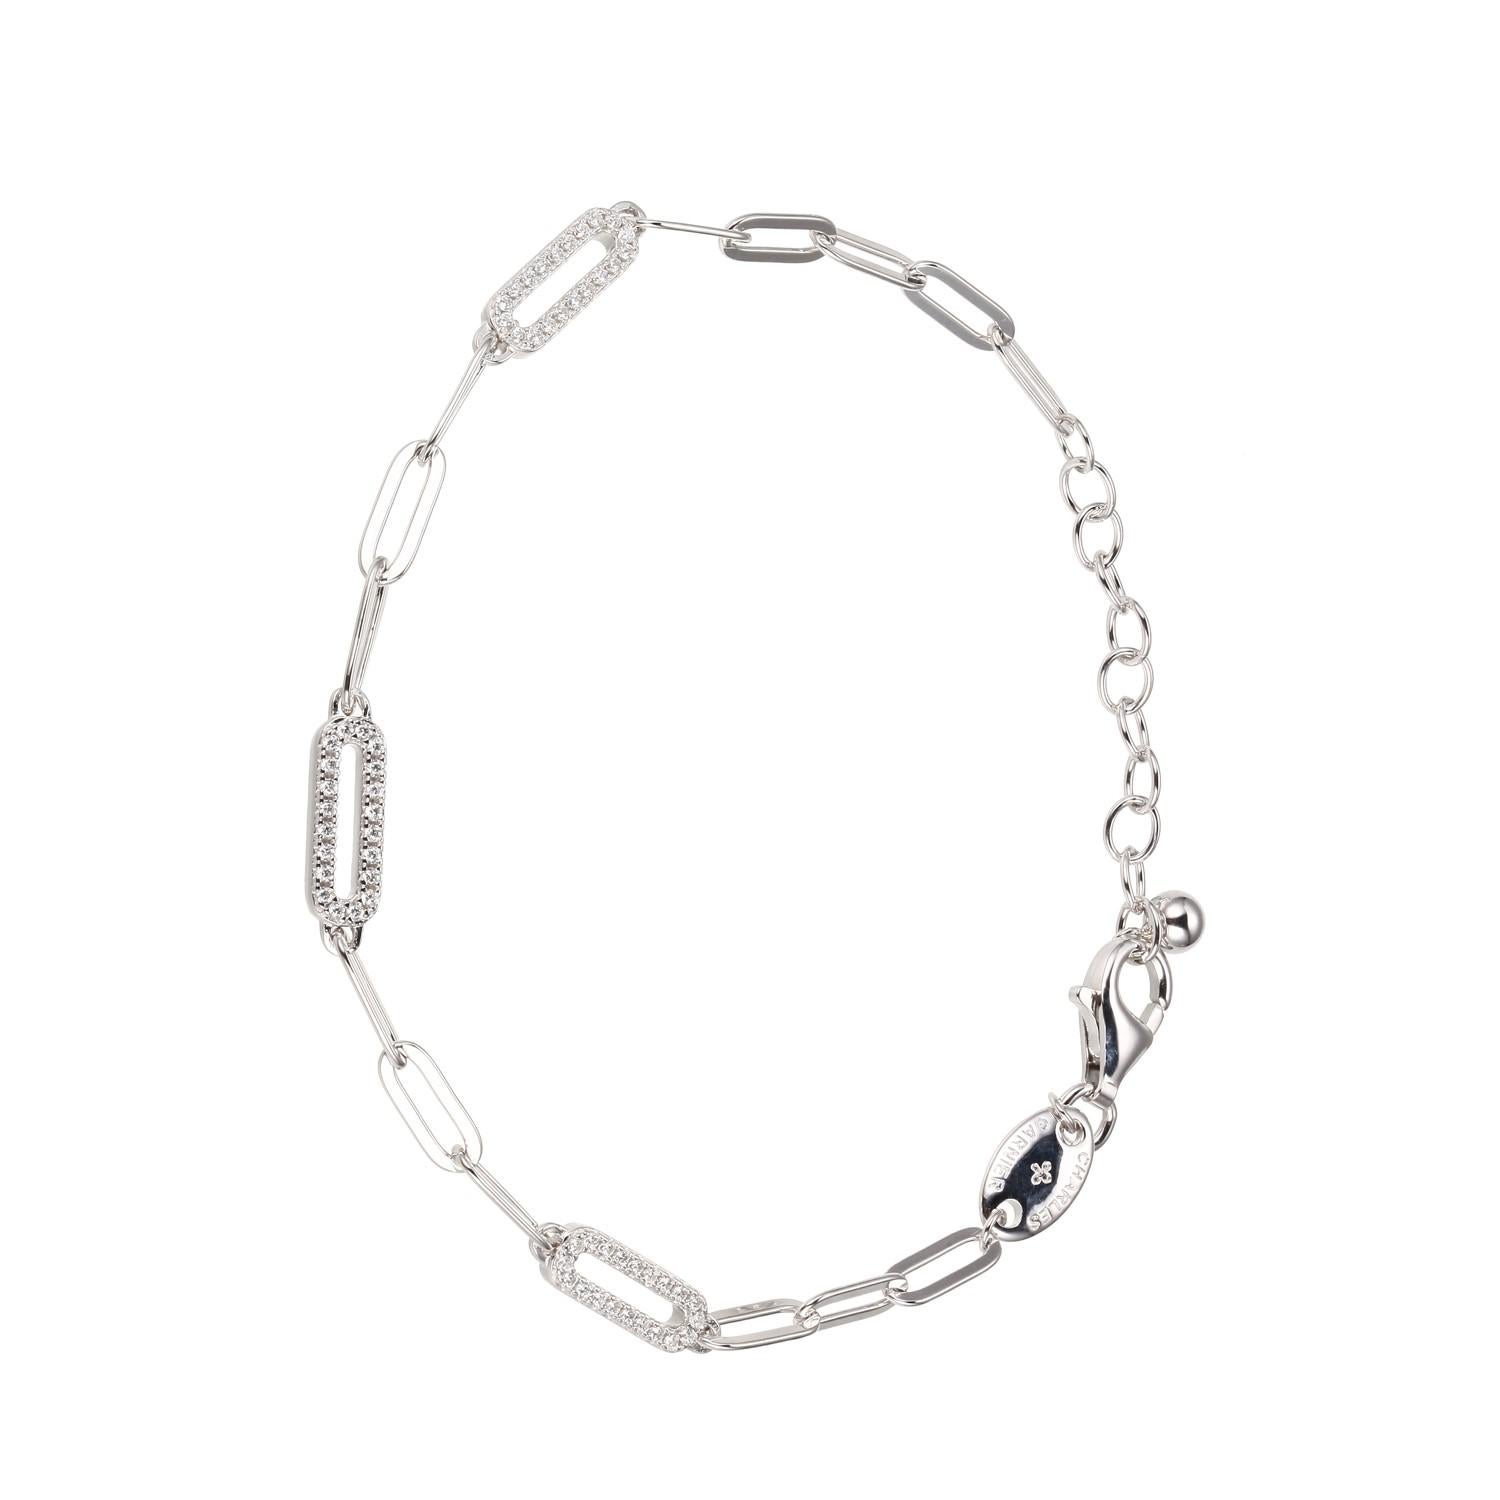 Sterling Silver Bracelet made with Paperclip Chain (3mm) and 3 CZ Link Stations, Measures 6.75